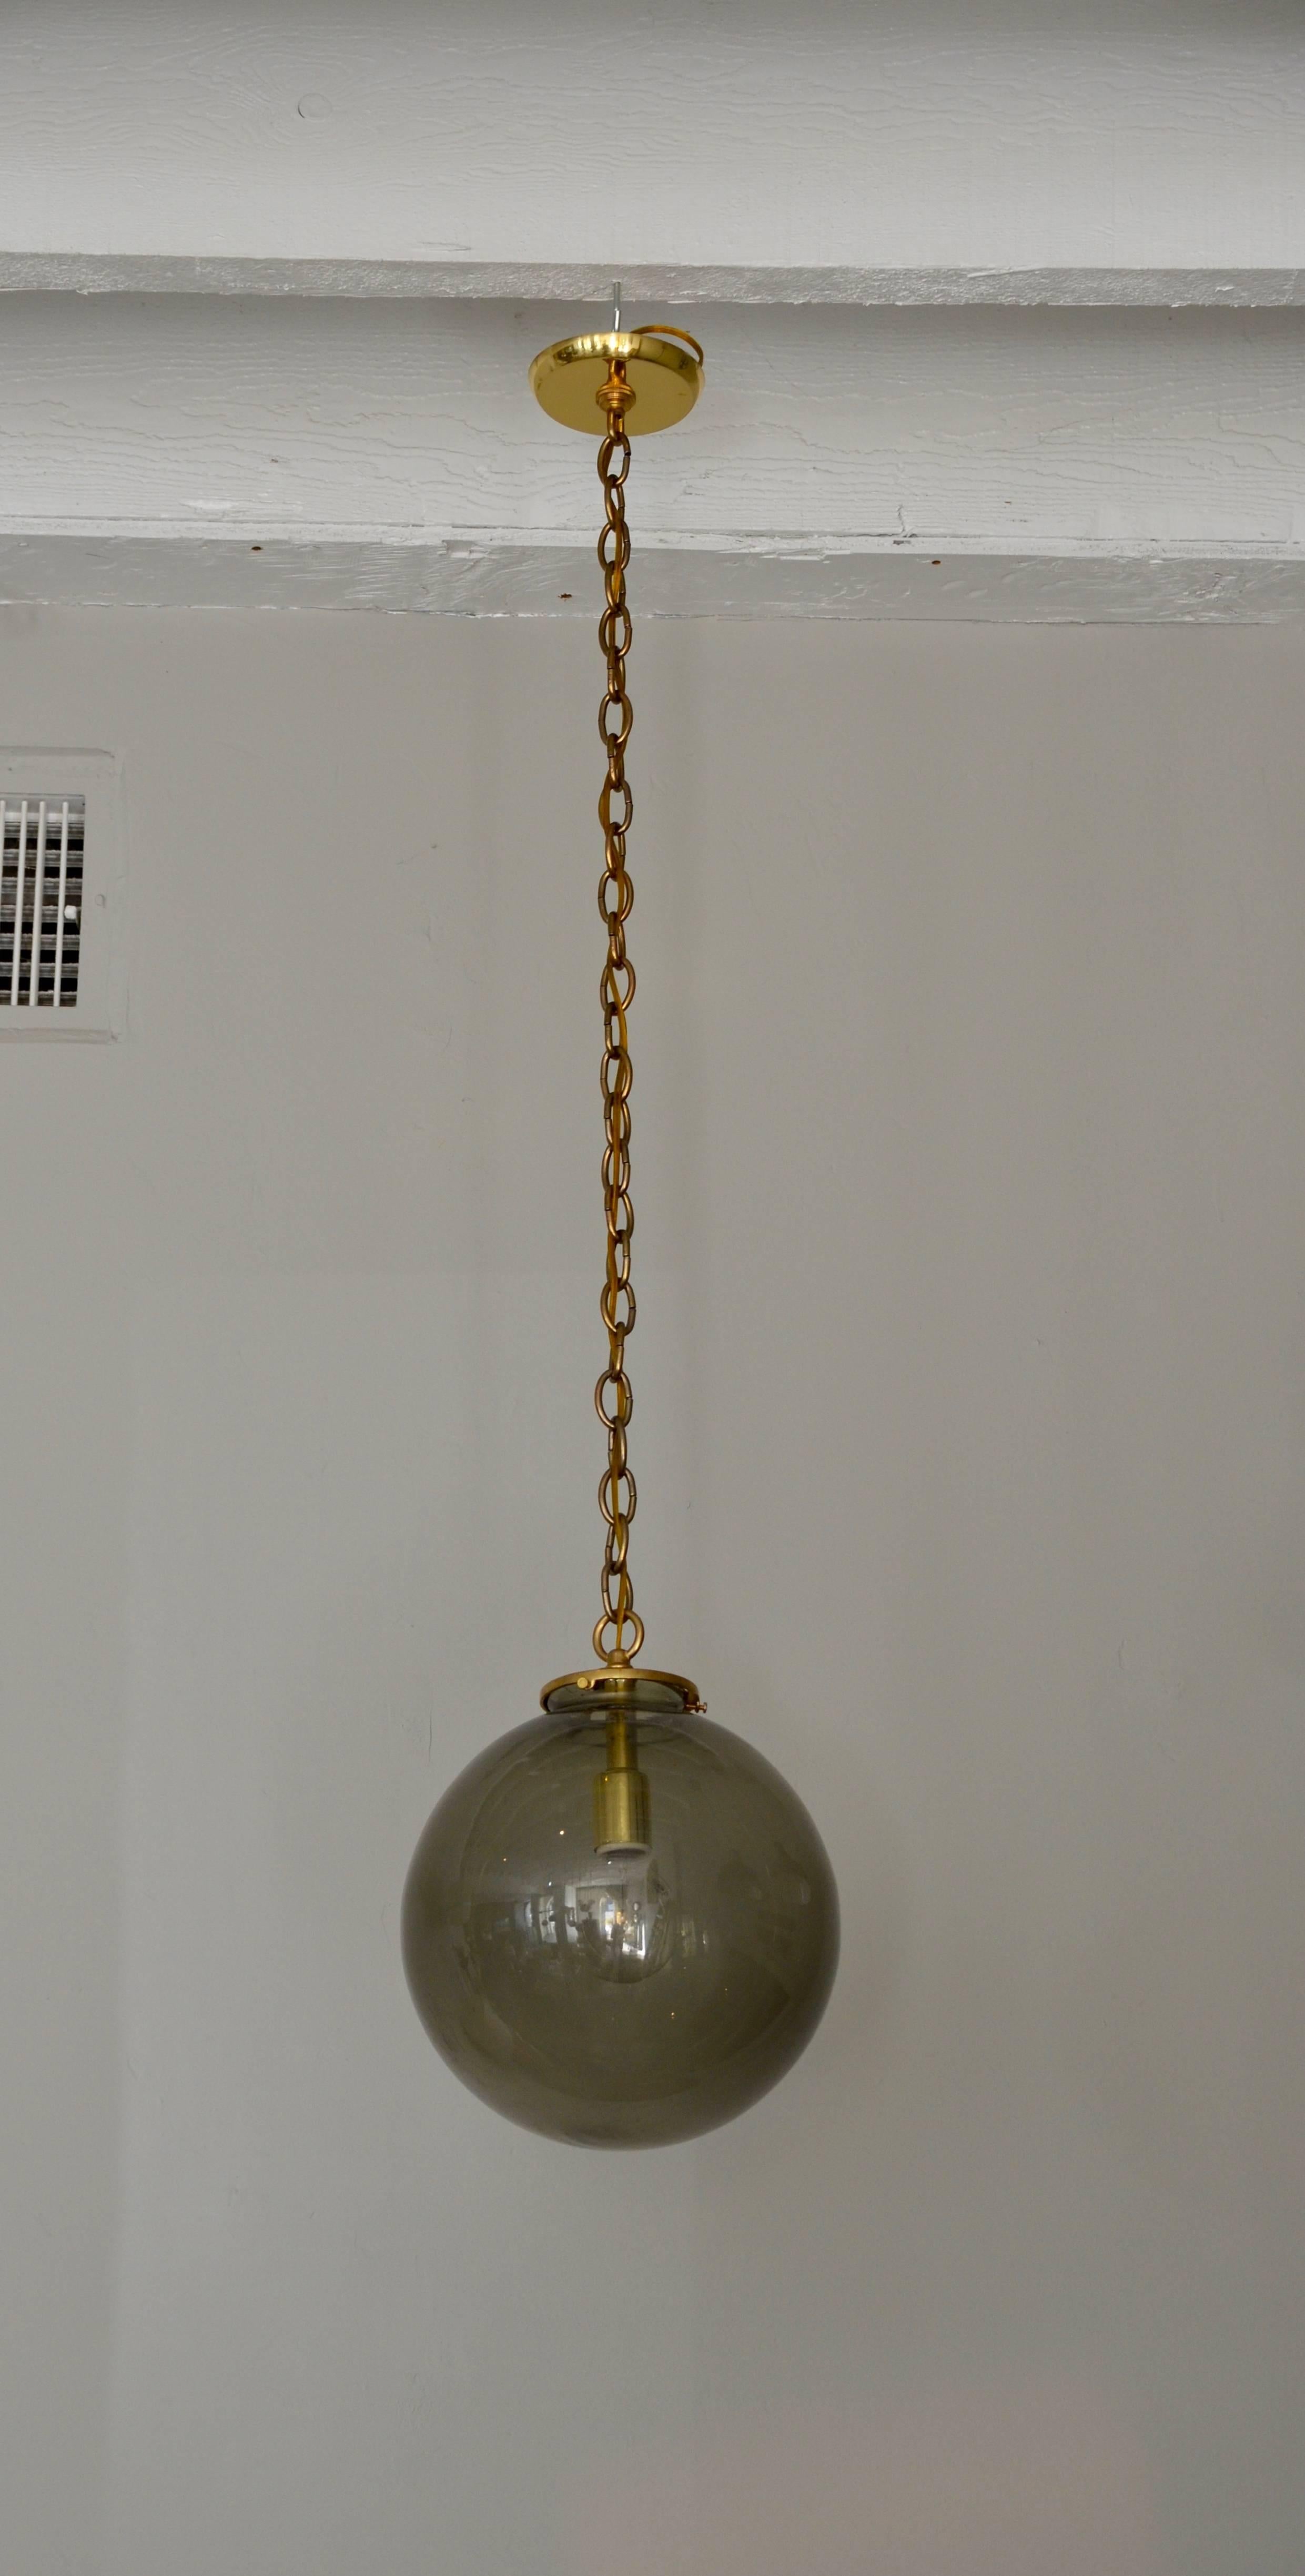 Pair of smoked glass midcentury globe lights. Brass fittings. Matching chain and canopy included. Chain length can be adjusted.

The last picture is to give an idea in setting. But they are not the exactly the same lights.